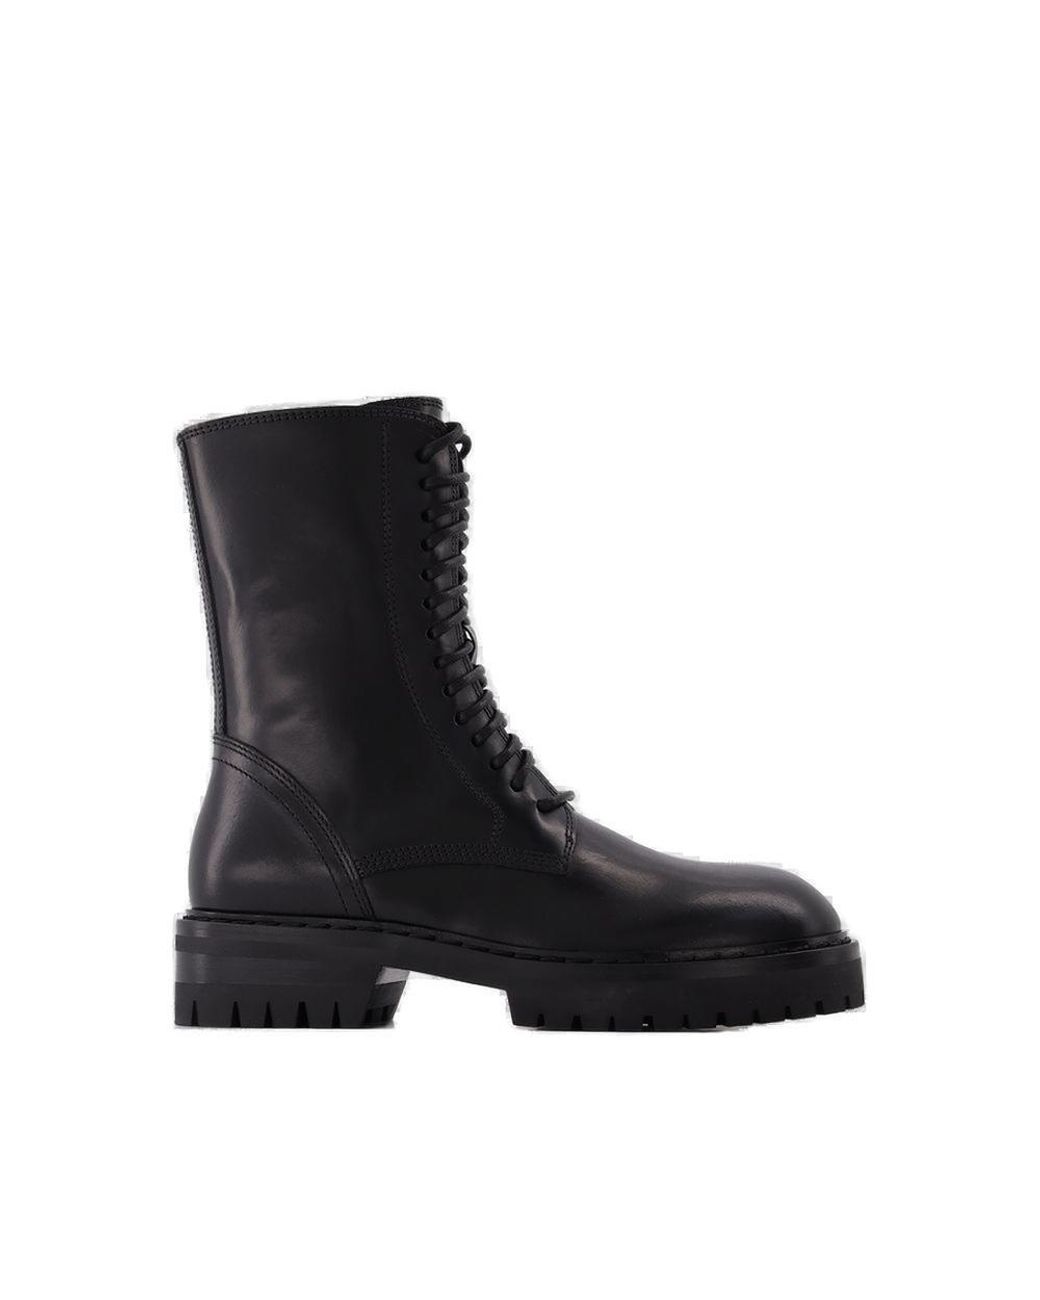 Ann Demeulemeester Alec Lace-up Boots in Black | Lyst